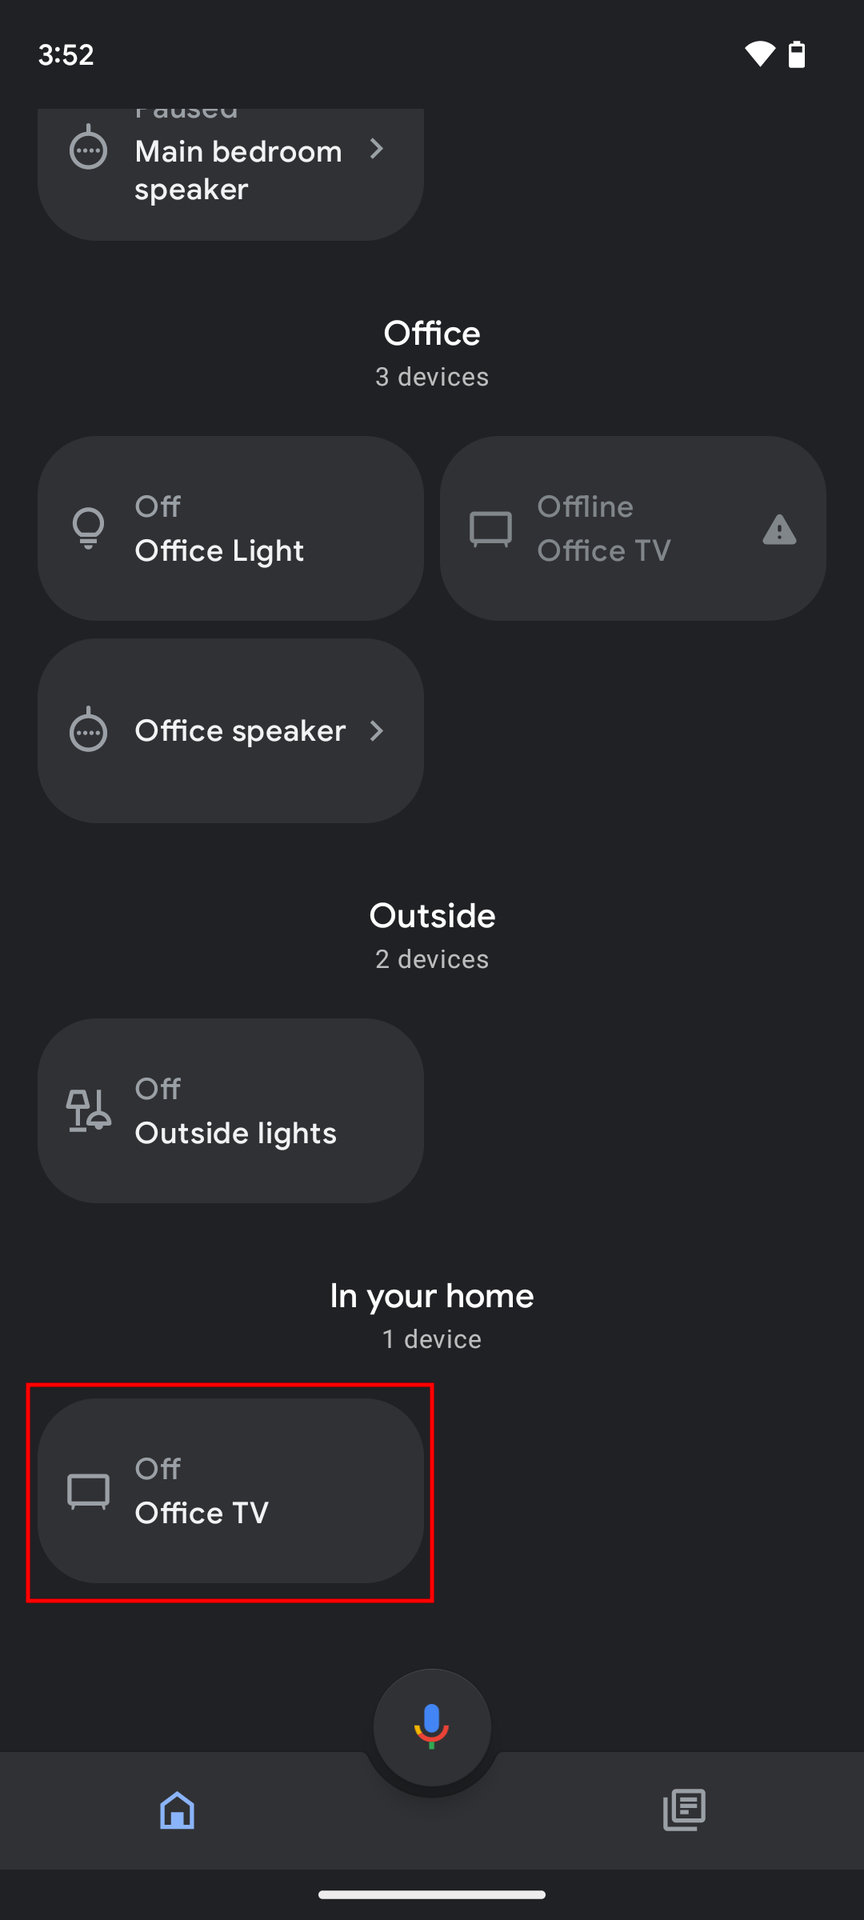 How to stop guests from accessing your Chromecast 1